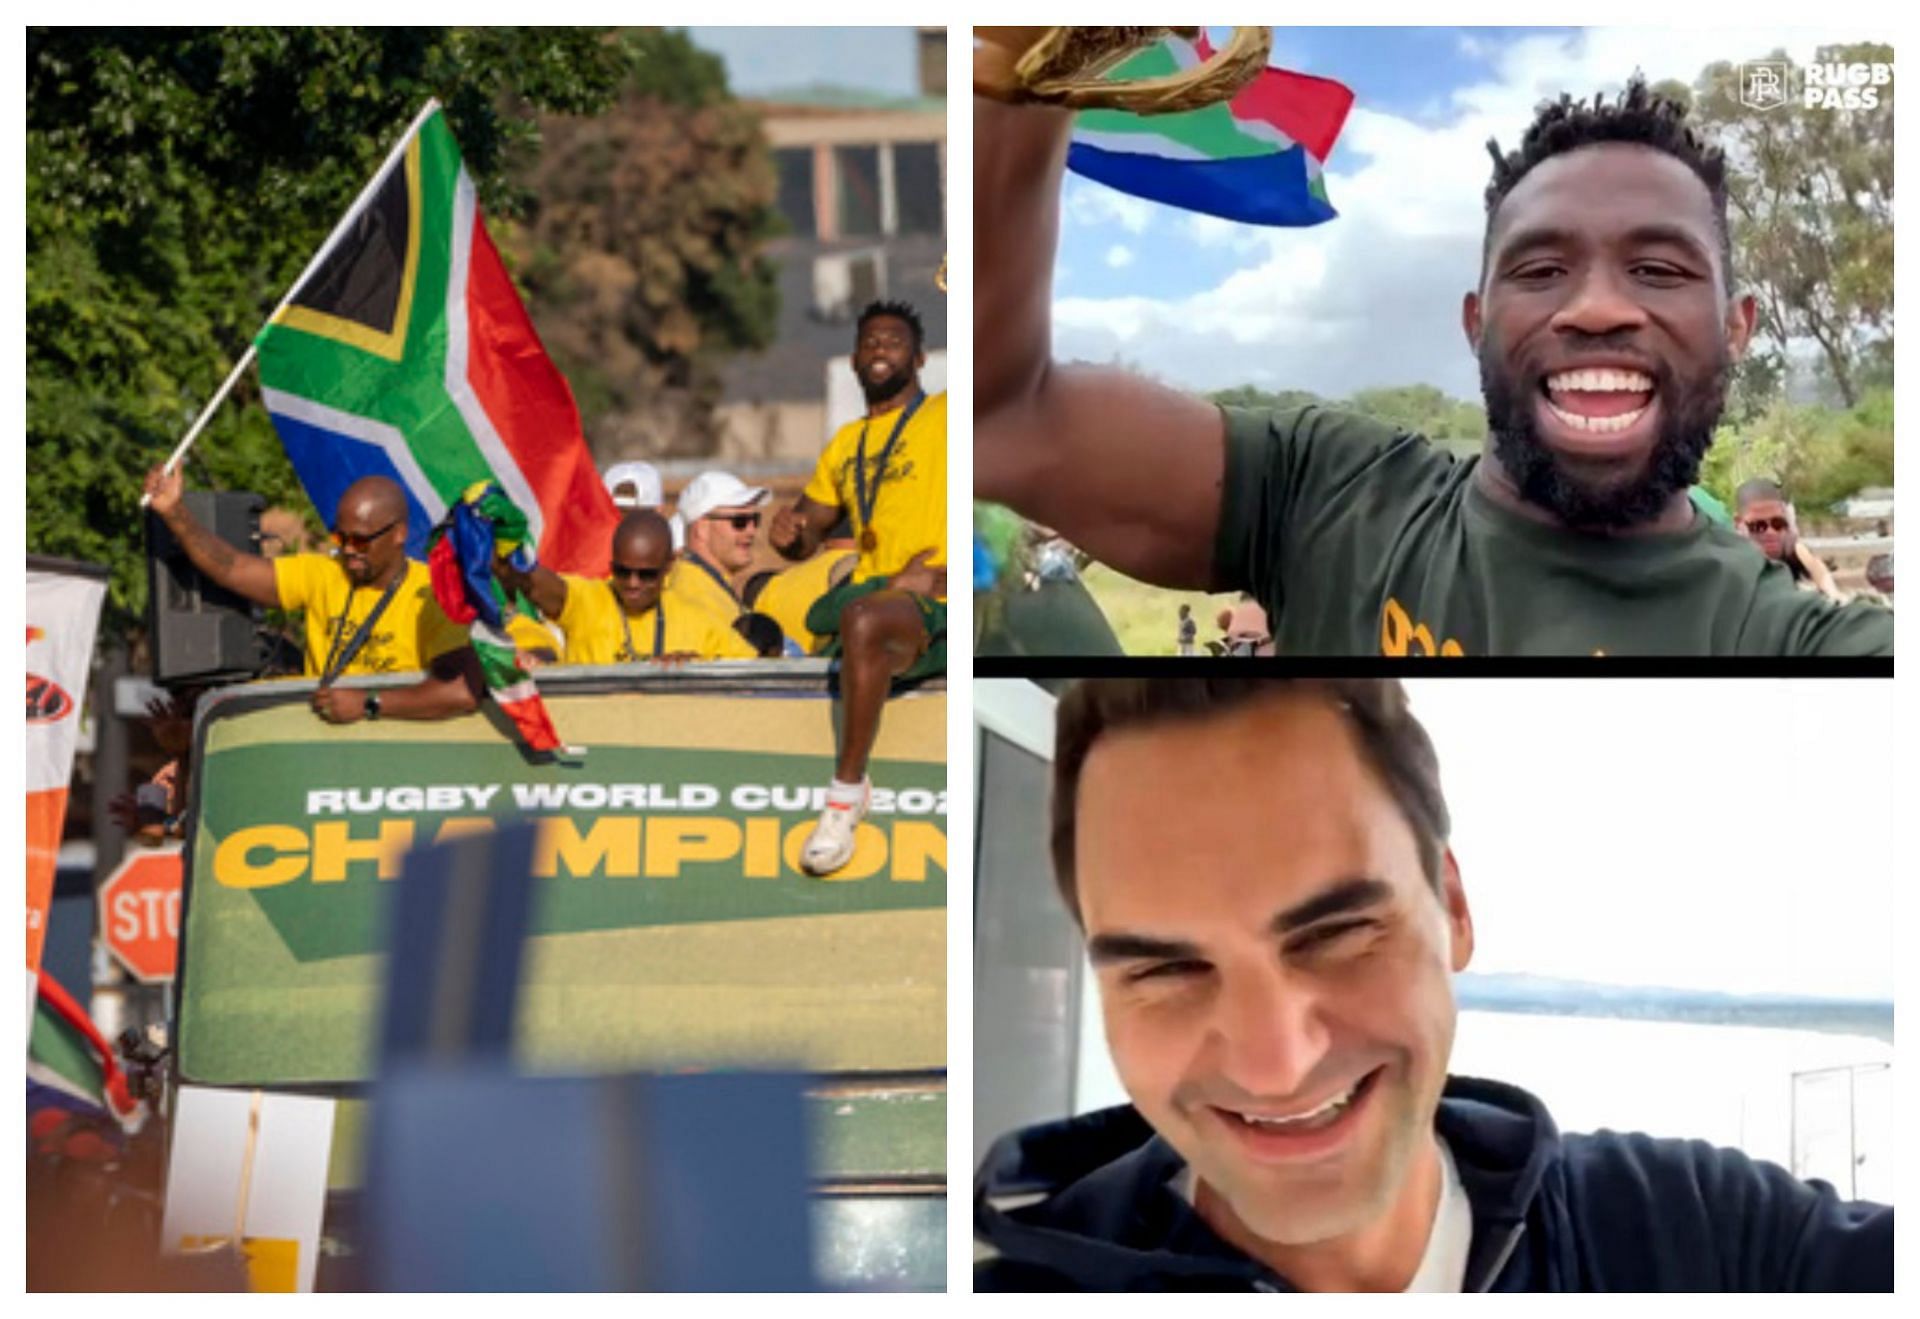 Federer has supported the Springboks all through their World Cup campaign